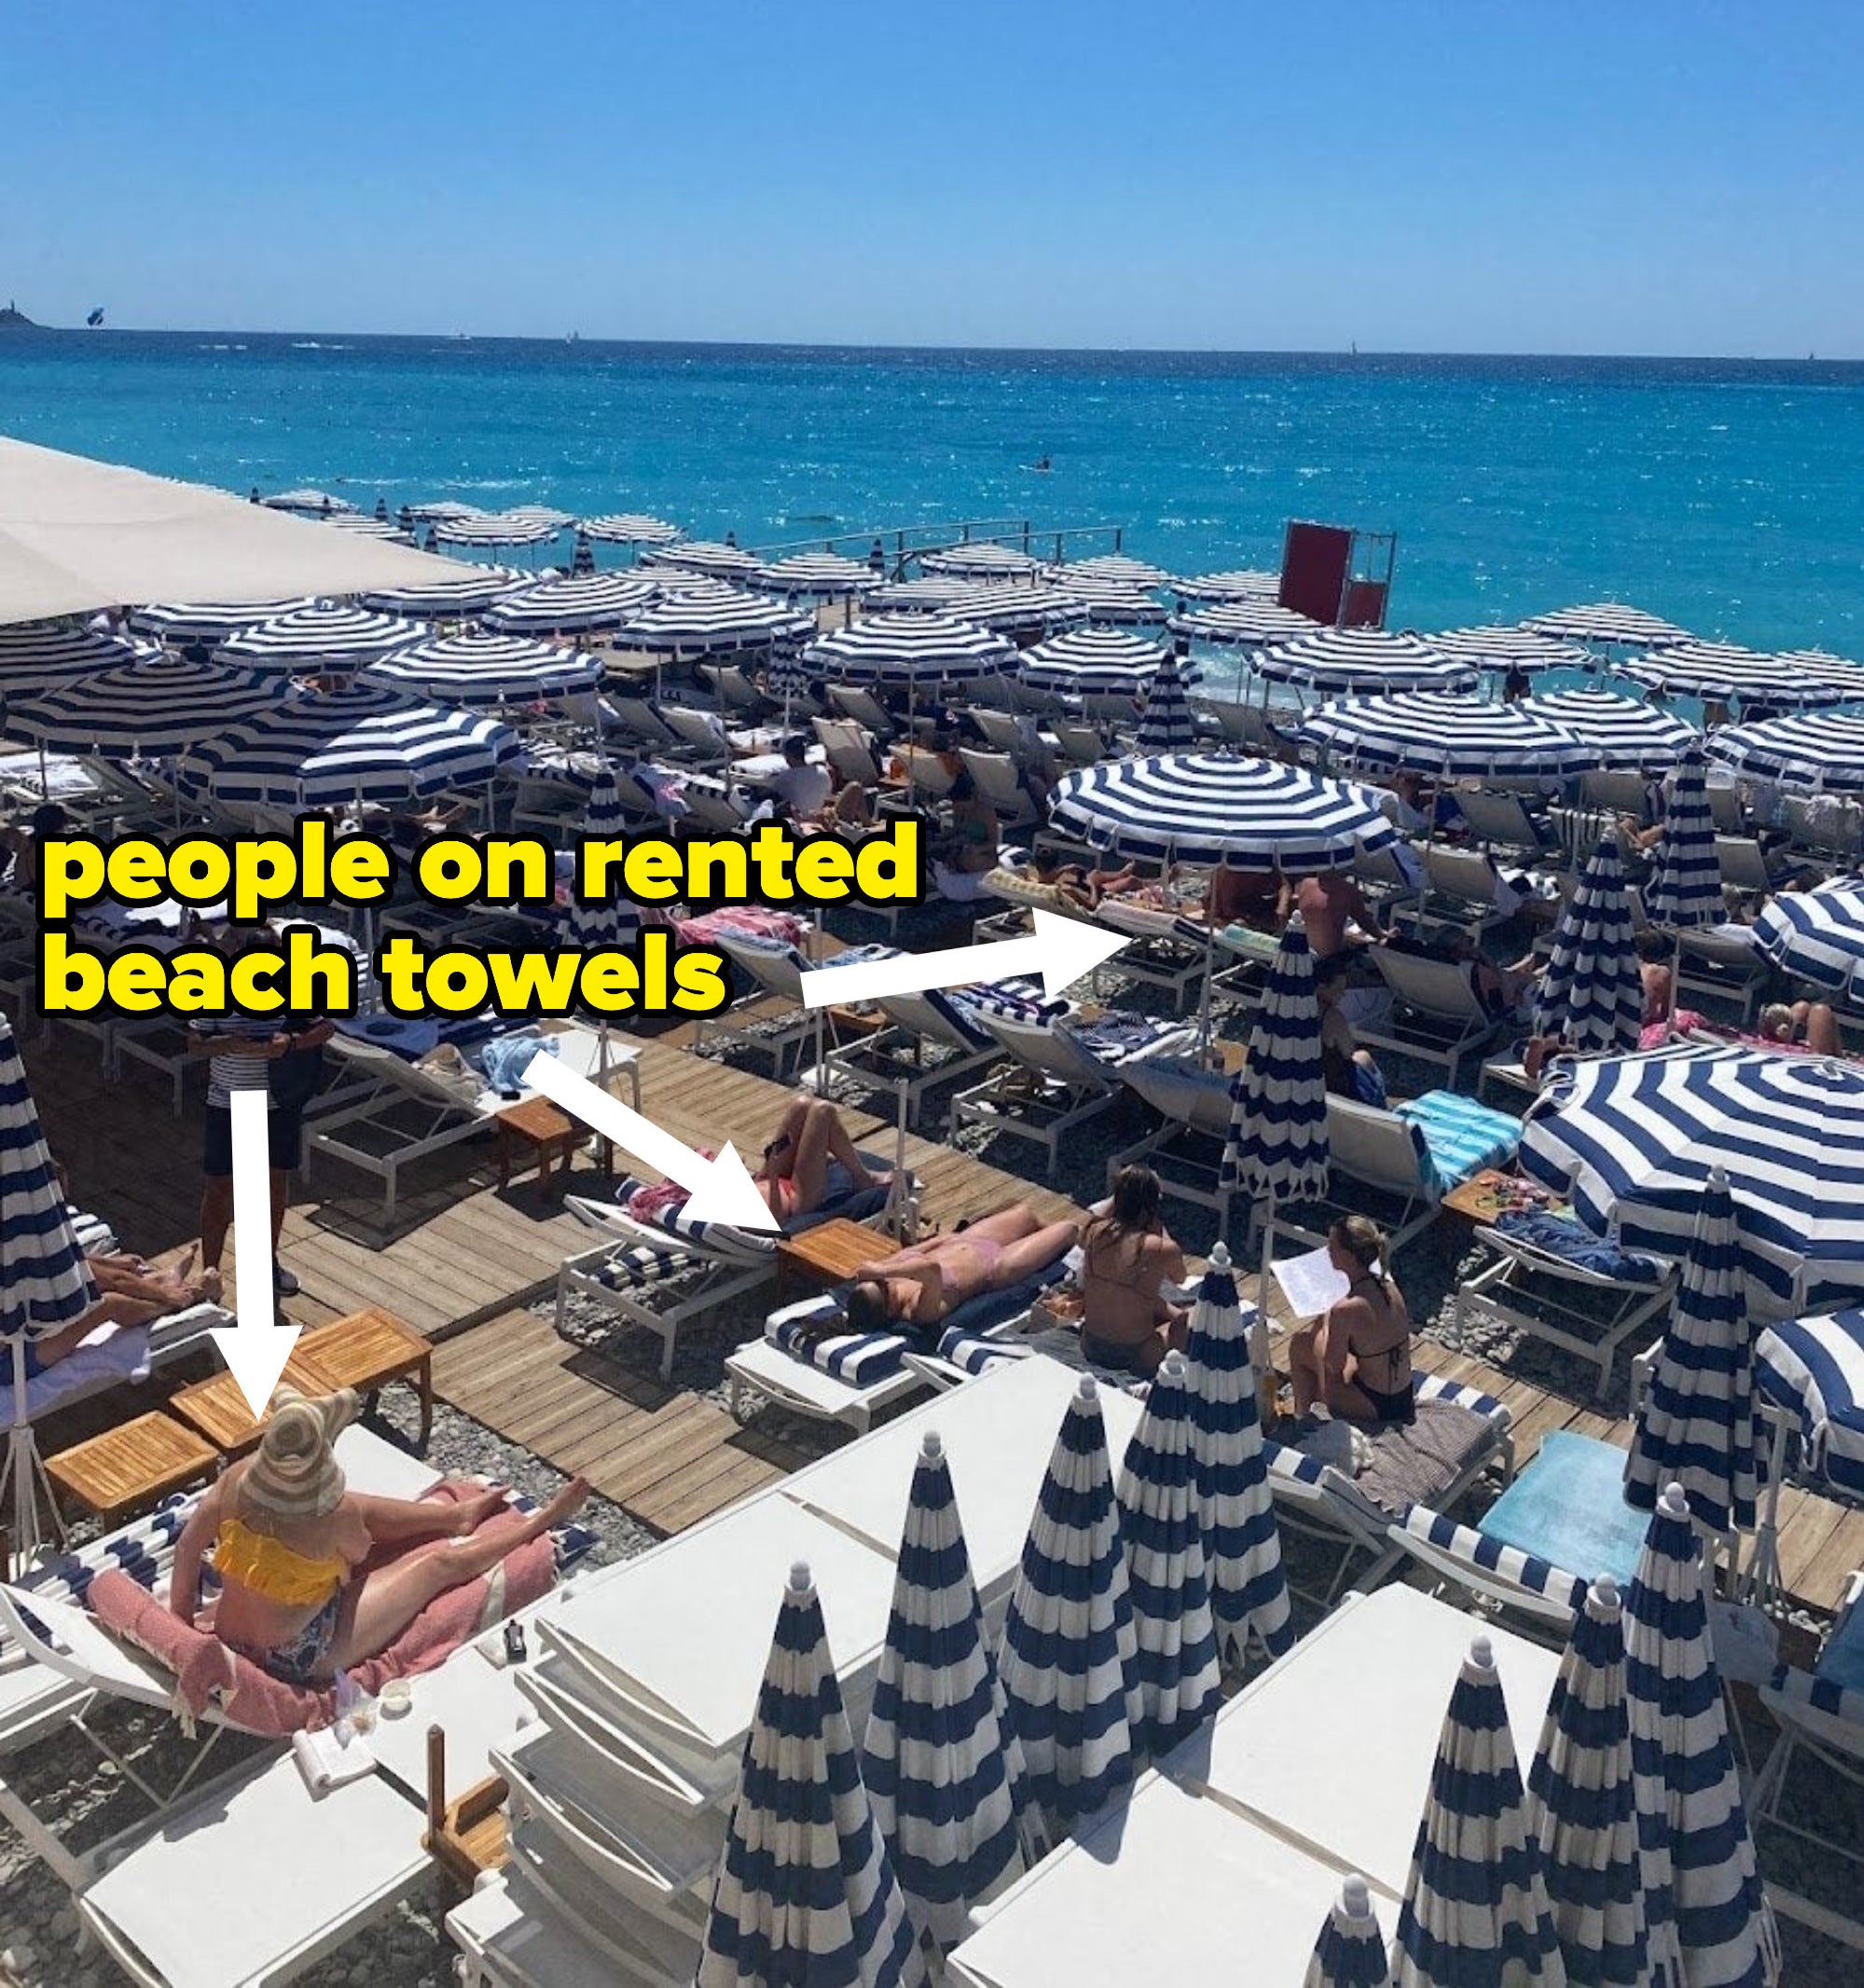 Arrow pointing to people on rented beach towels under an umbrella